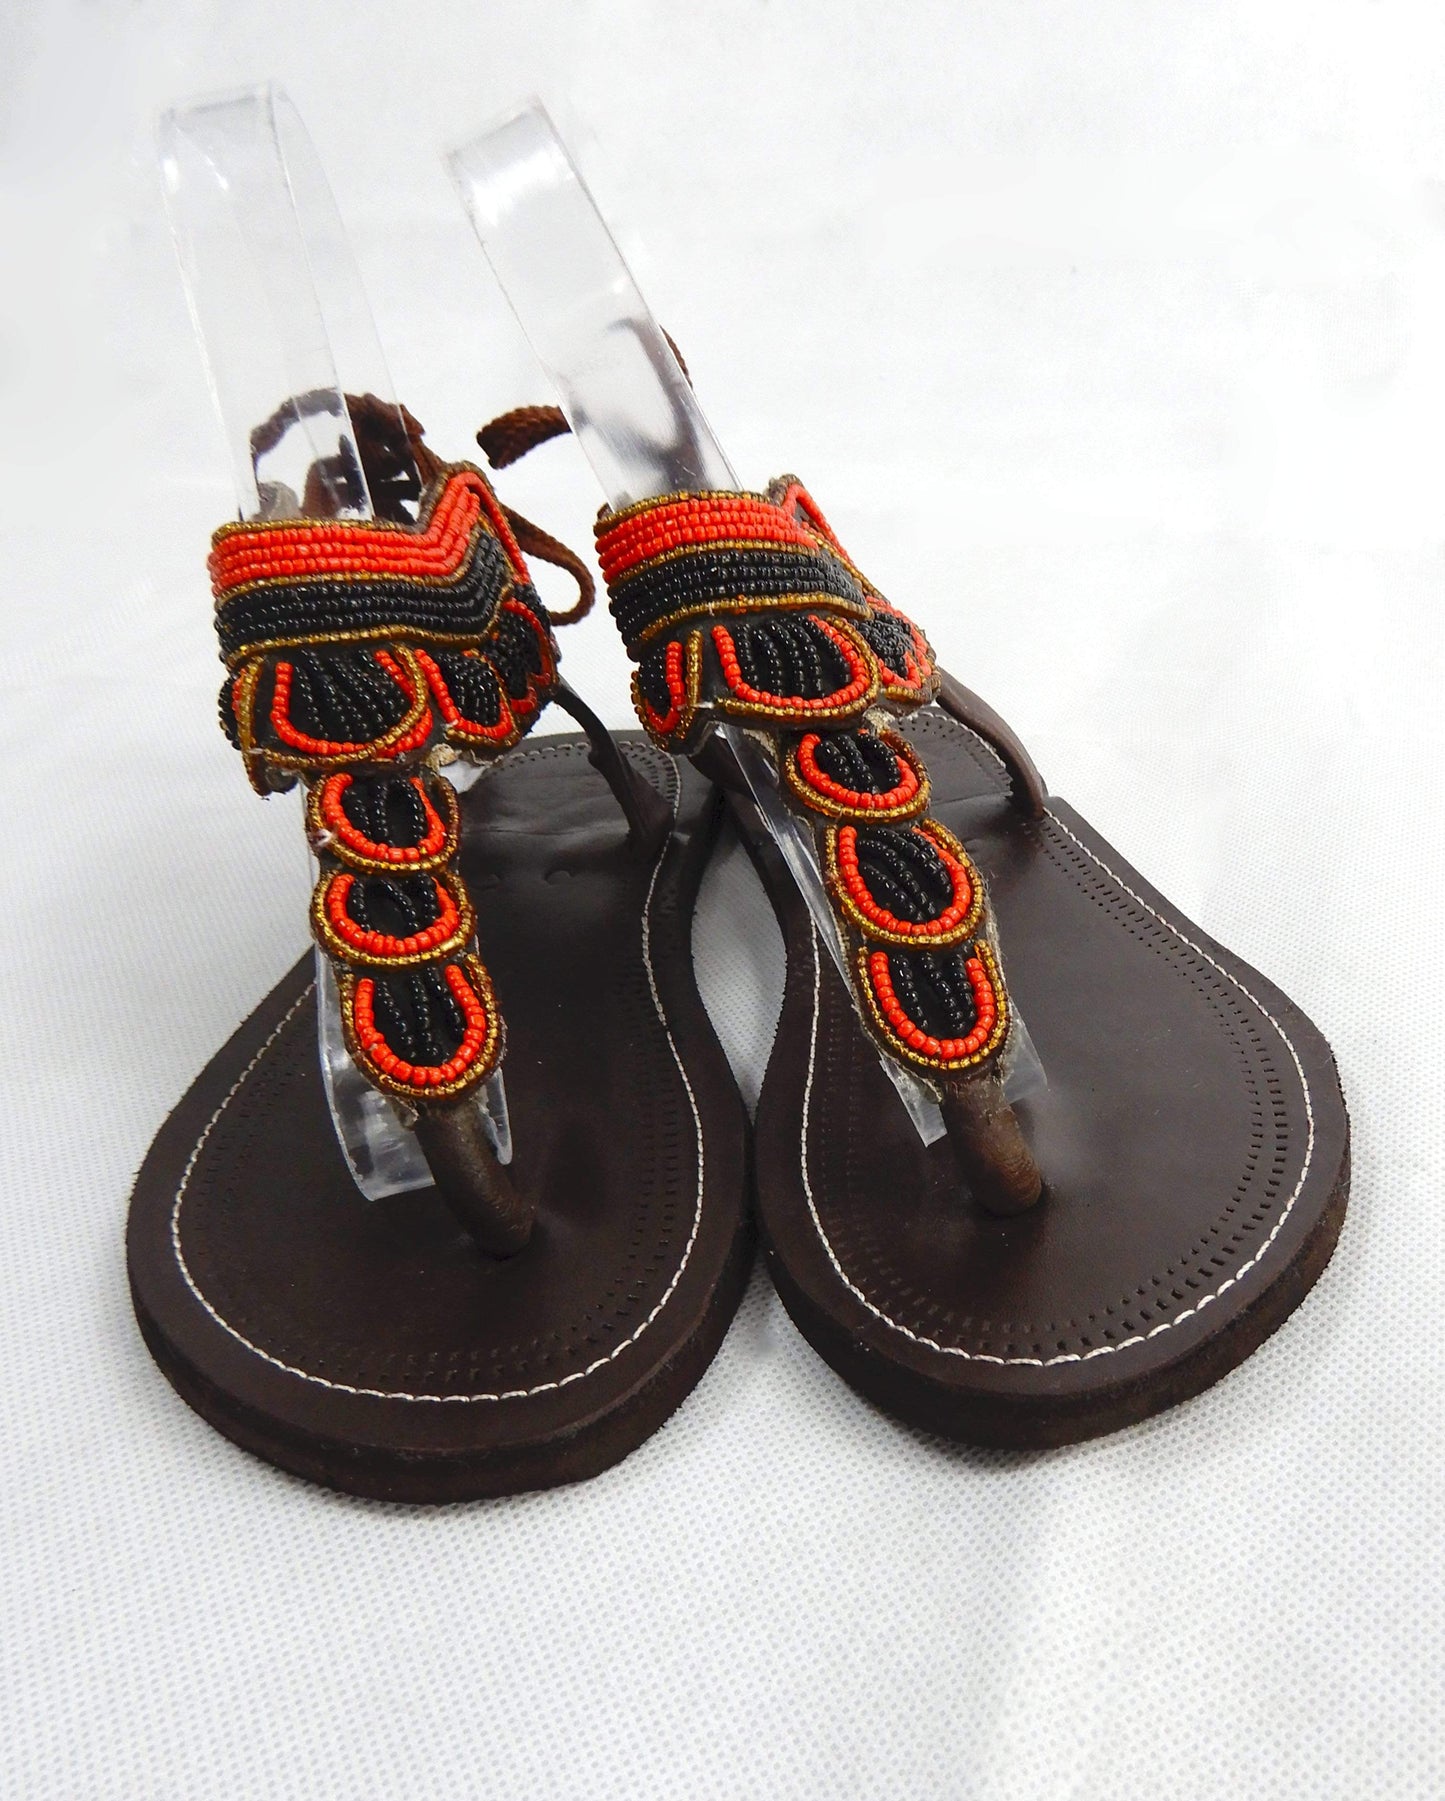 Afrix Style Shoes Red/Black Leather Sandals